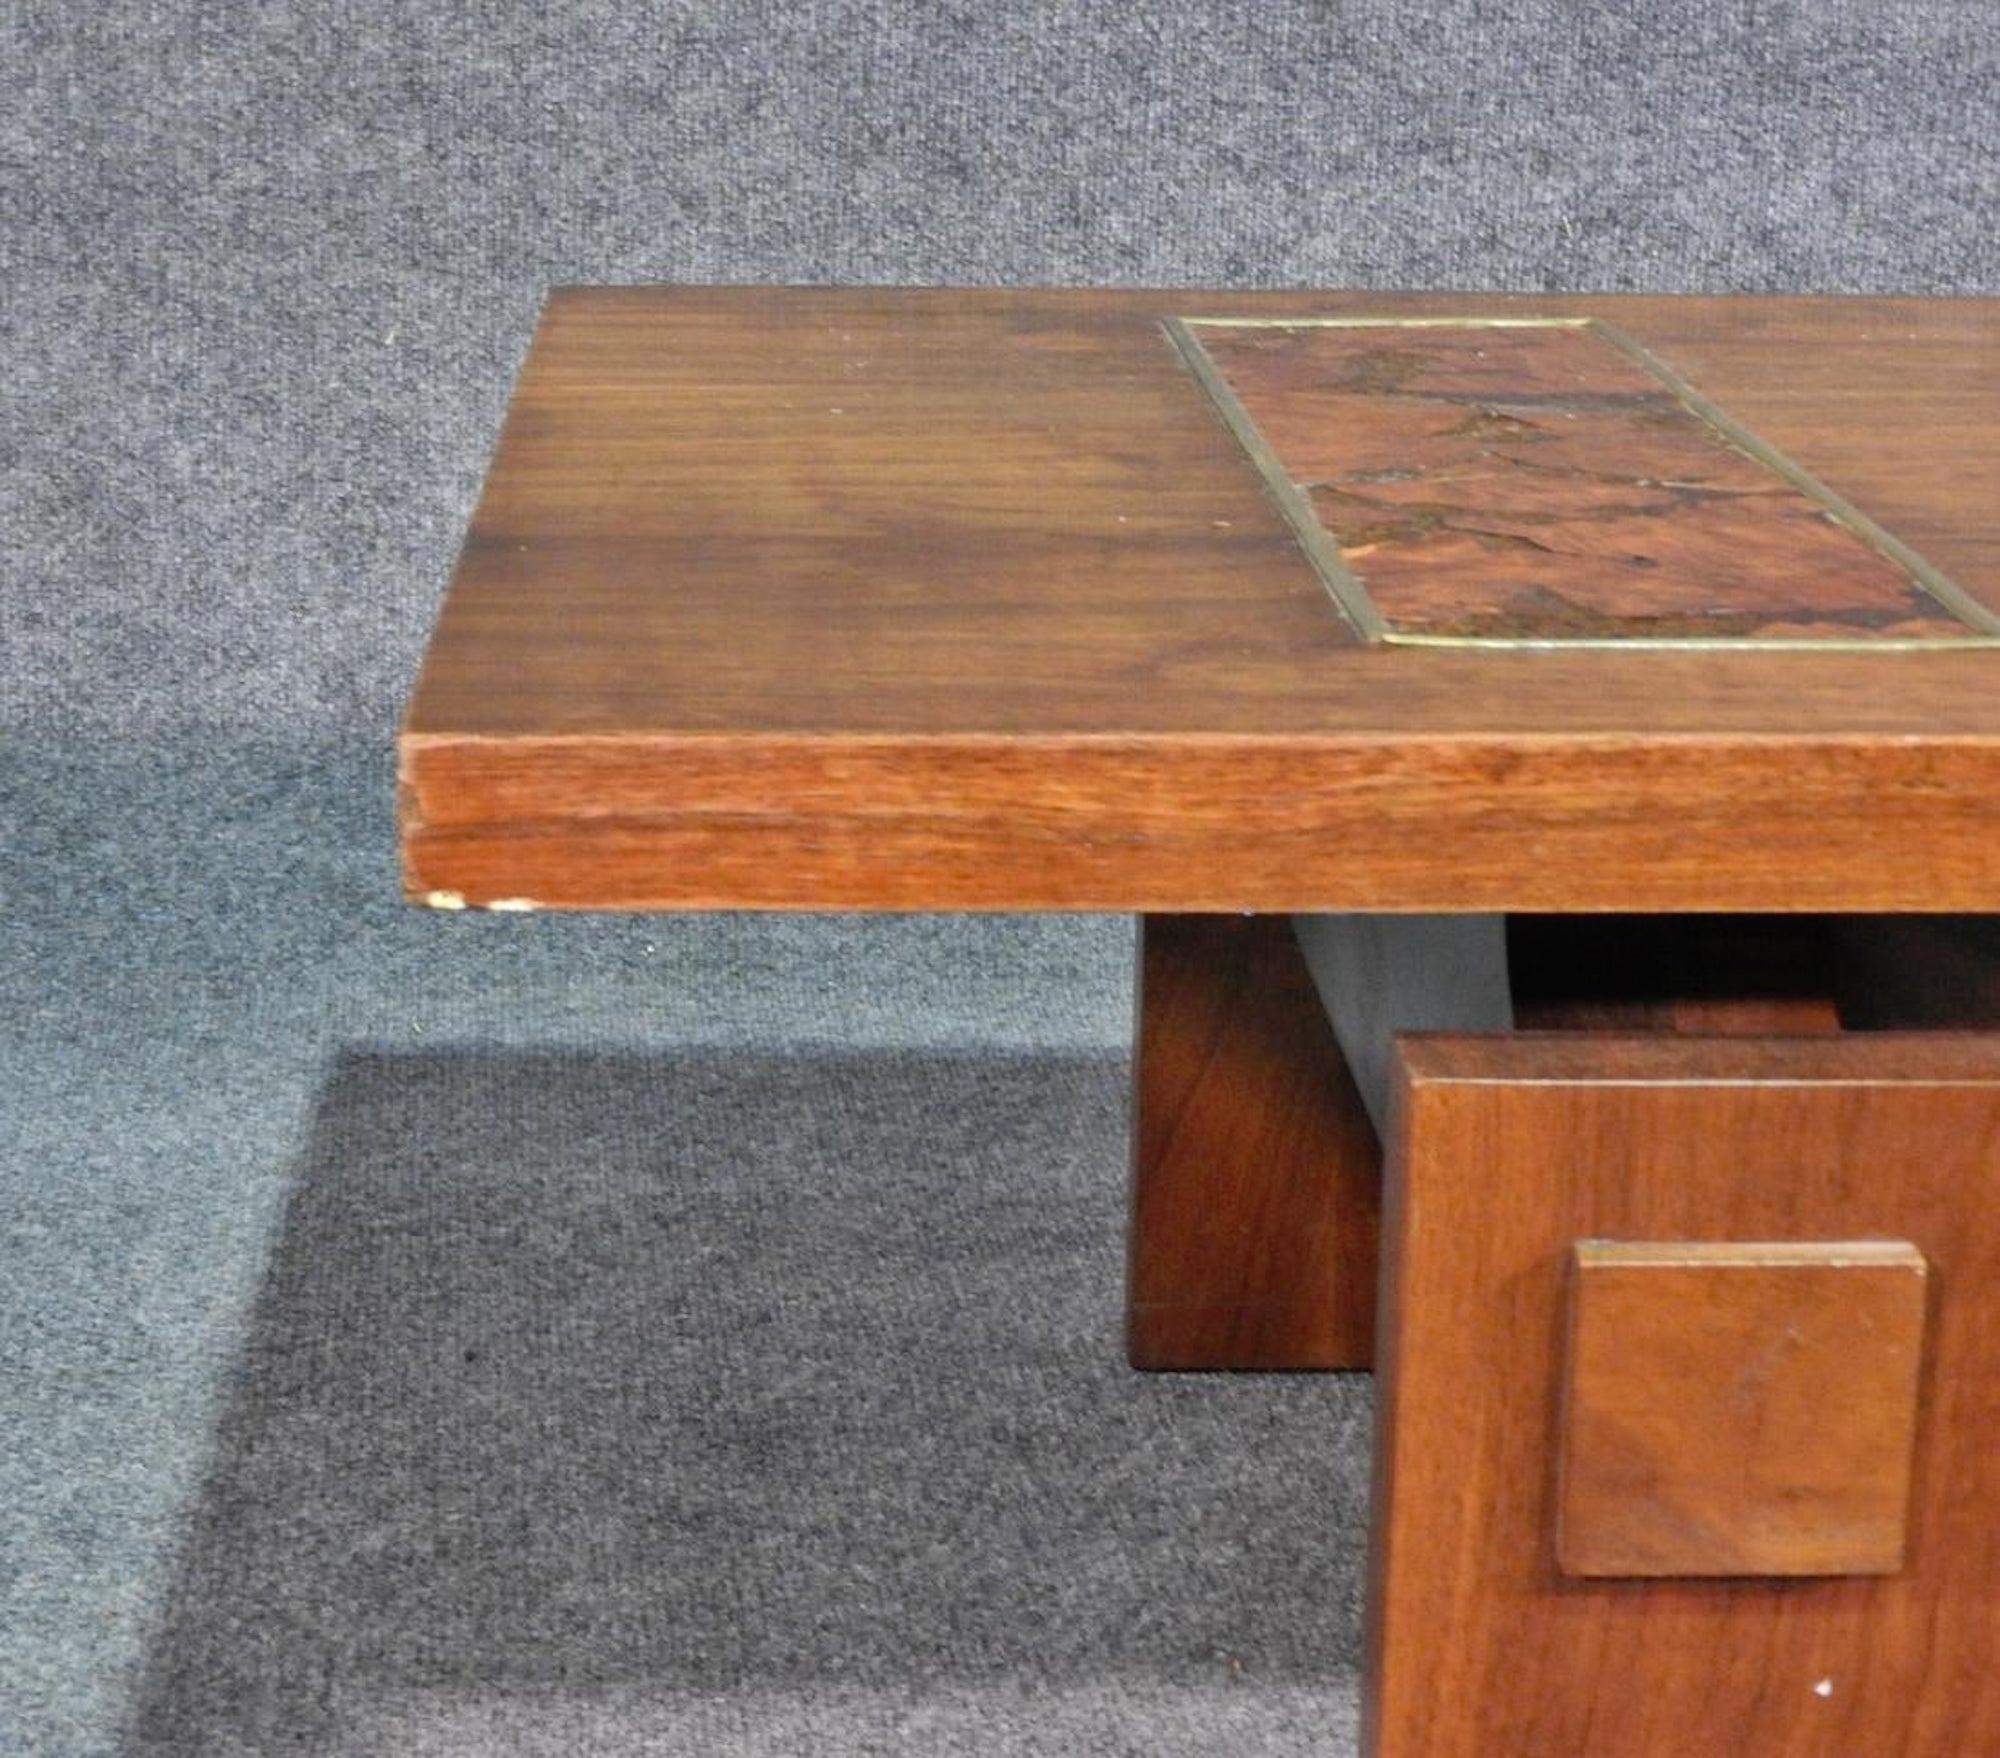 Mid-Century Modern coffee table with brilliant burl wood inlay. Unique design by Lane.
(Please confirm item location - NY or NJ - with dealer).
  